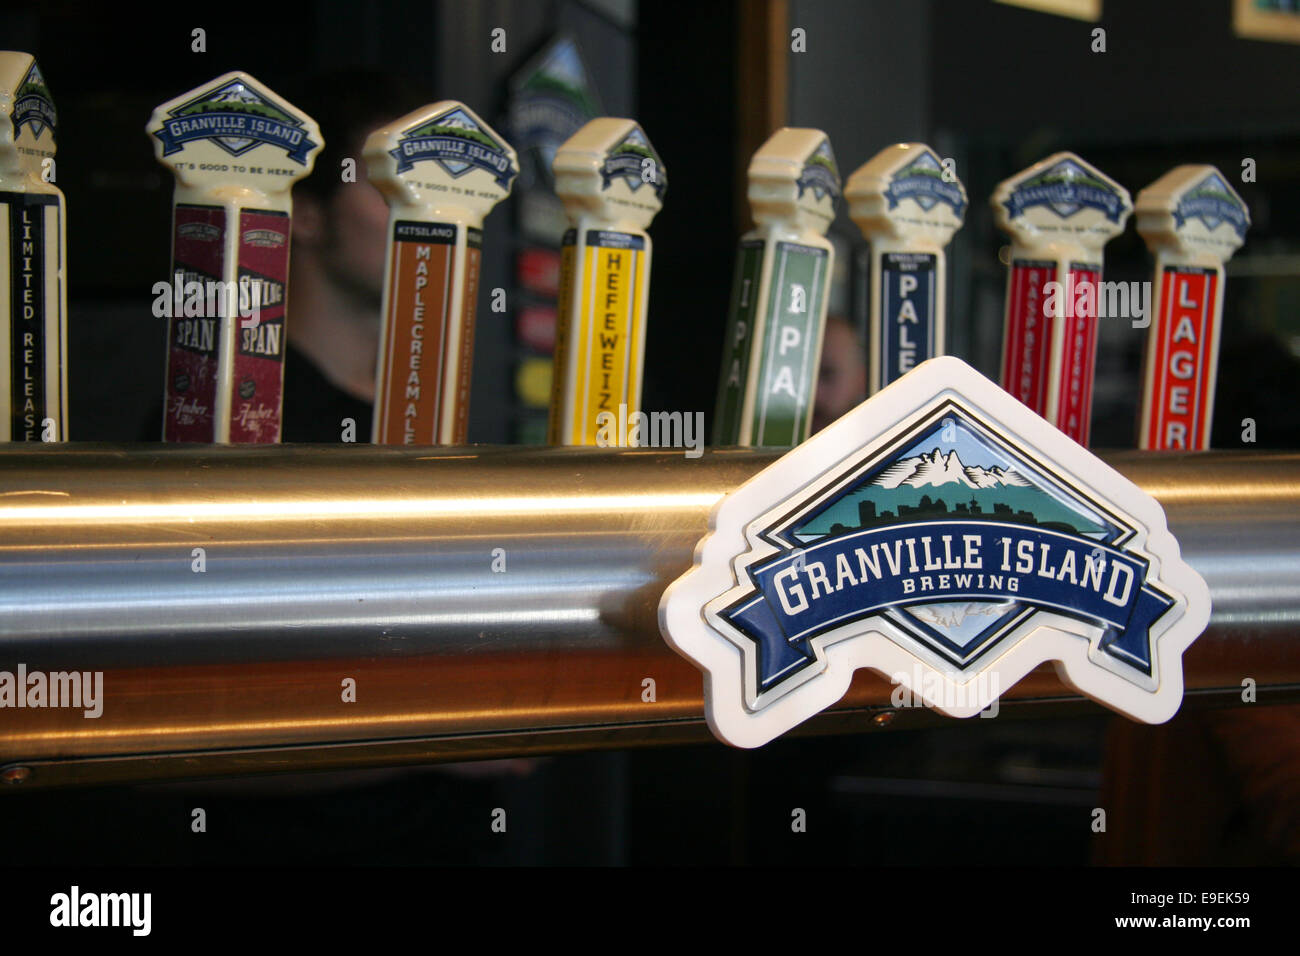 Granville Island brewing company beer taps. Stock Photo